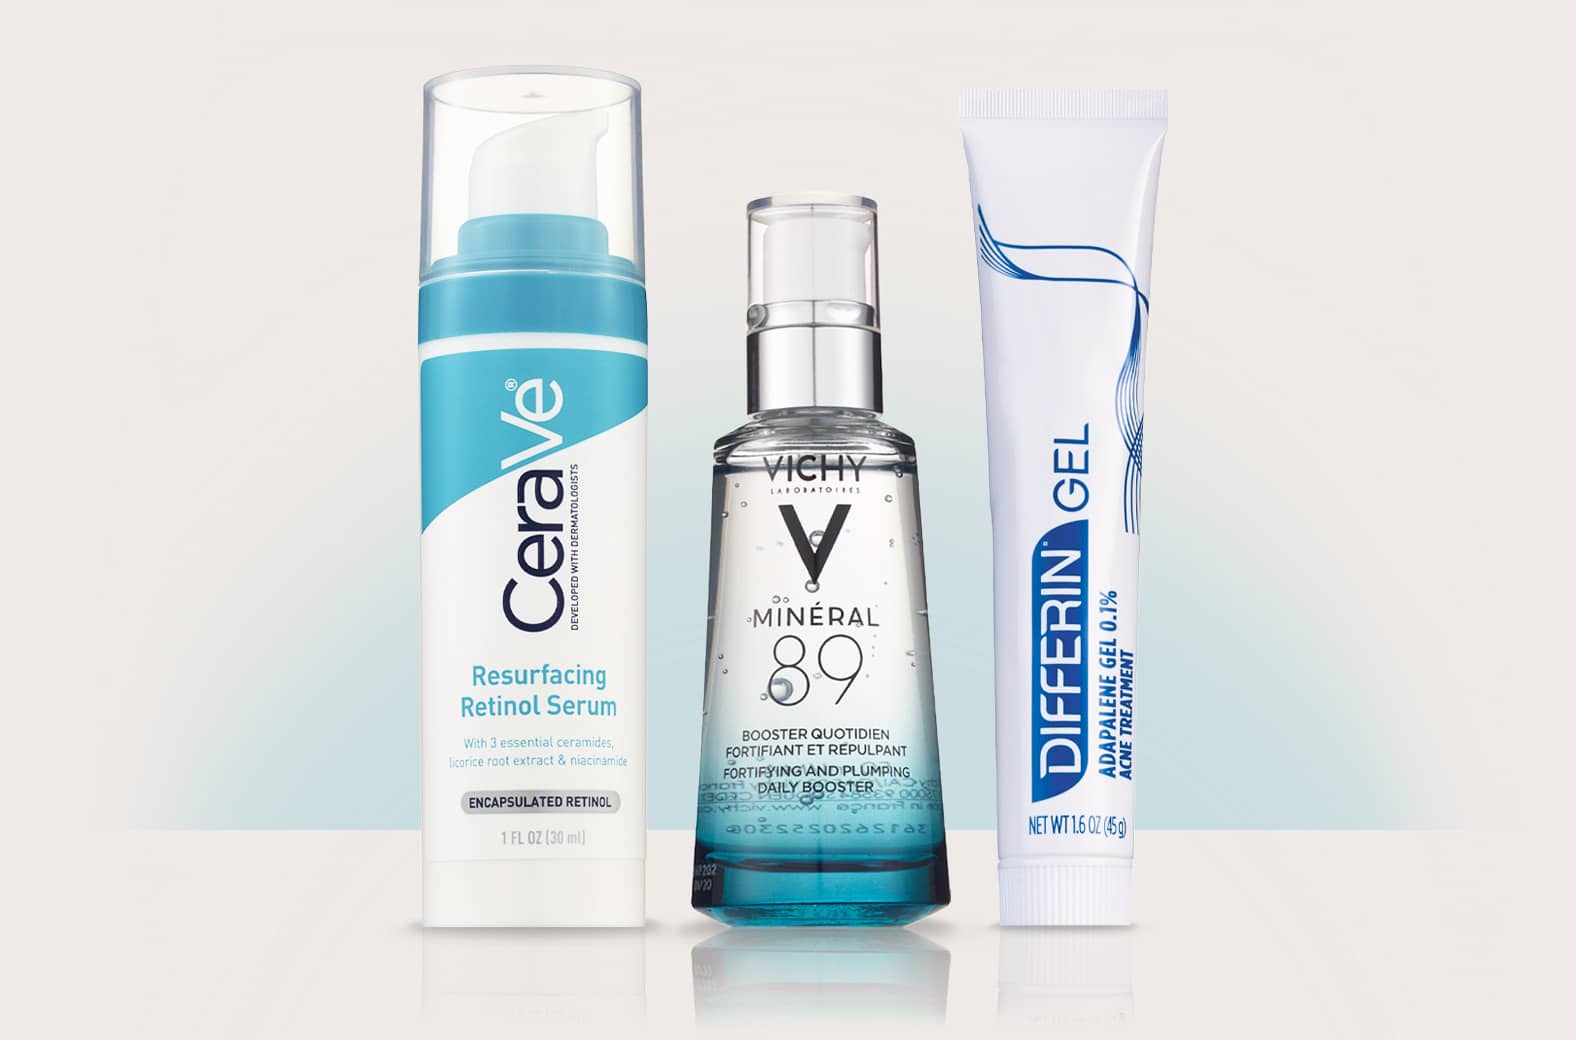 CeraVe, Vichy and Differin acne care products